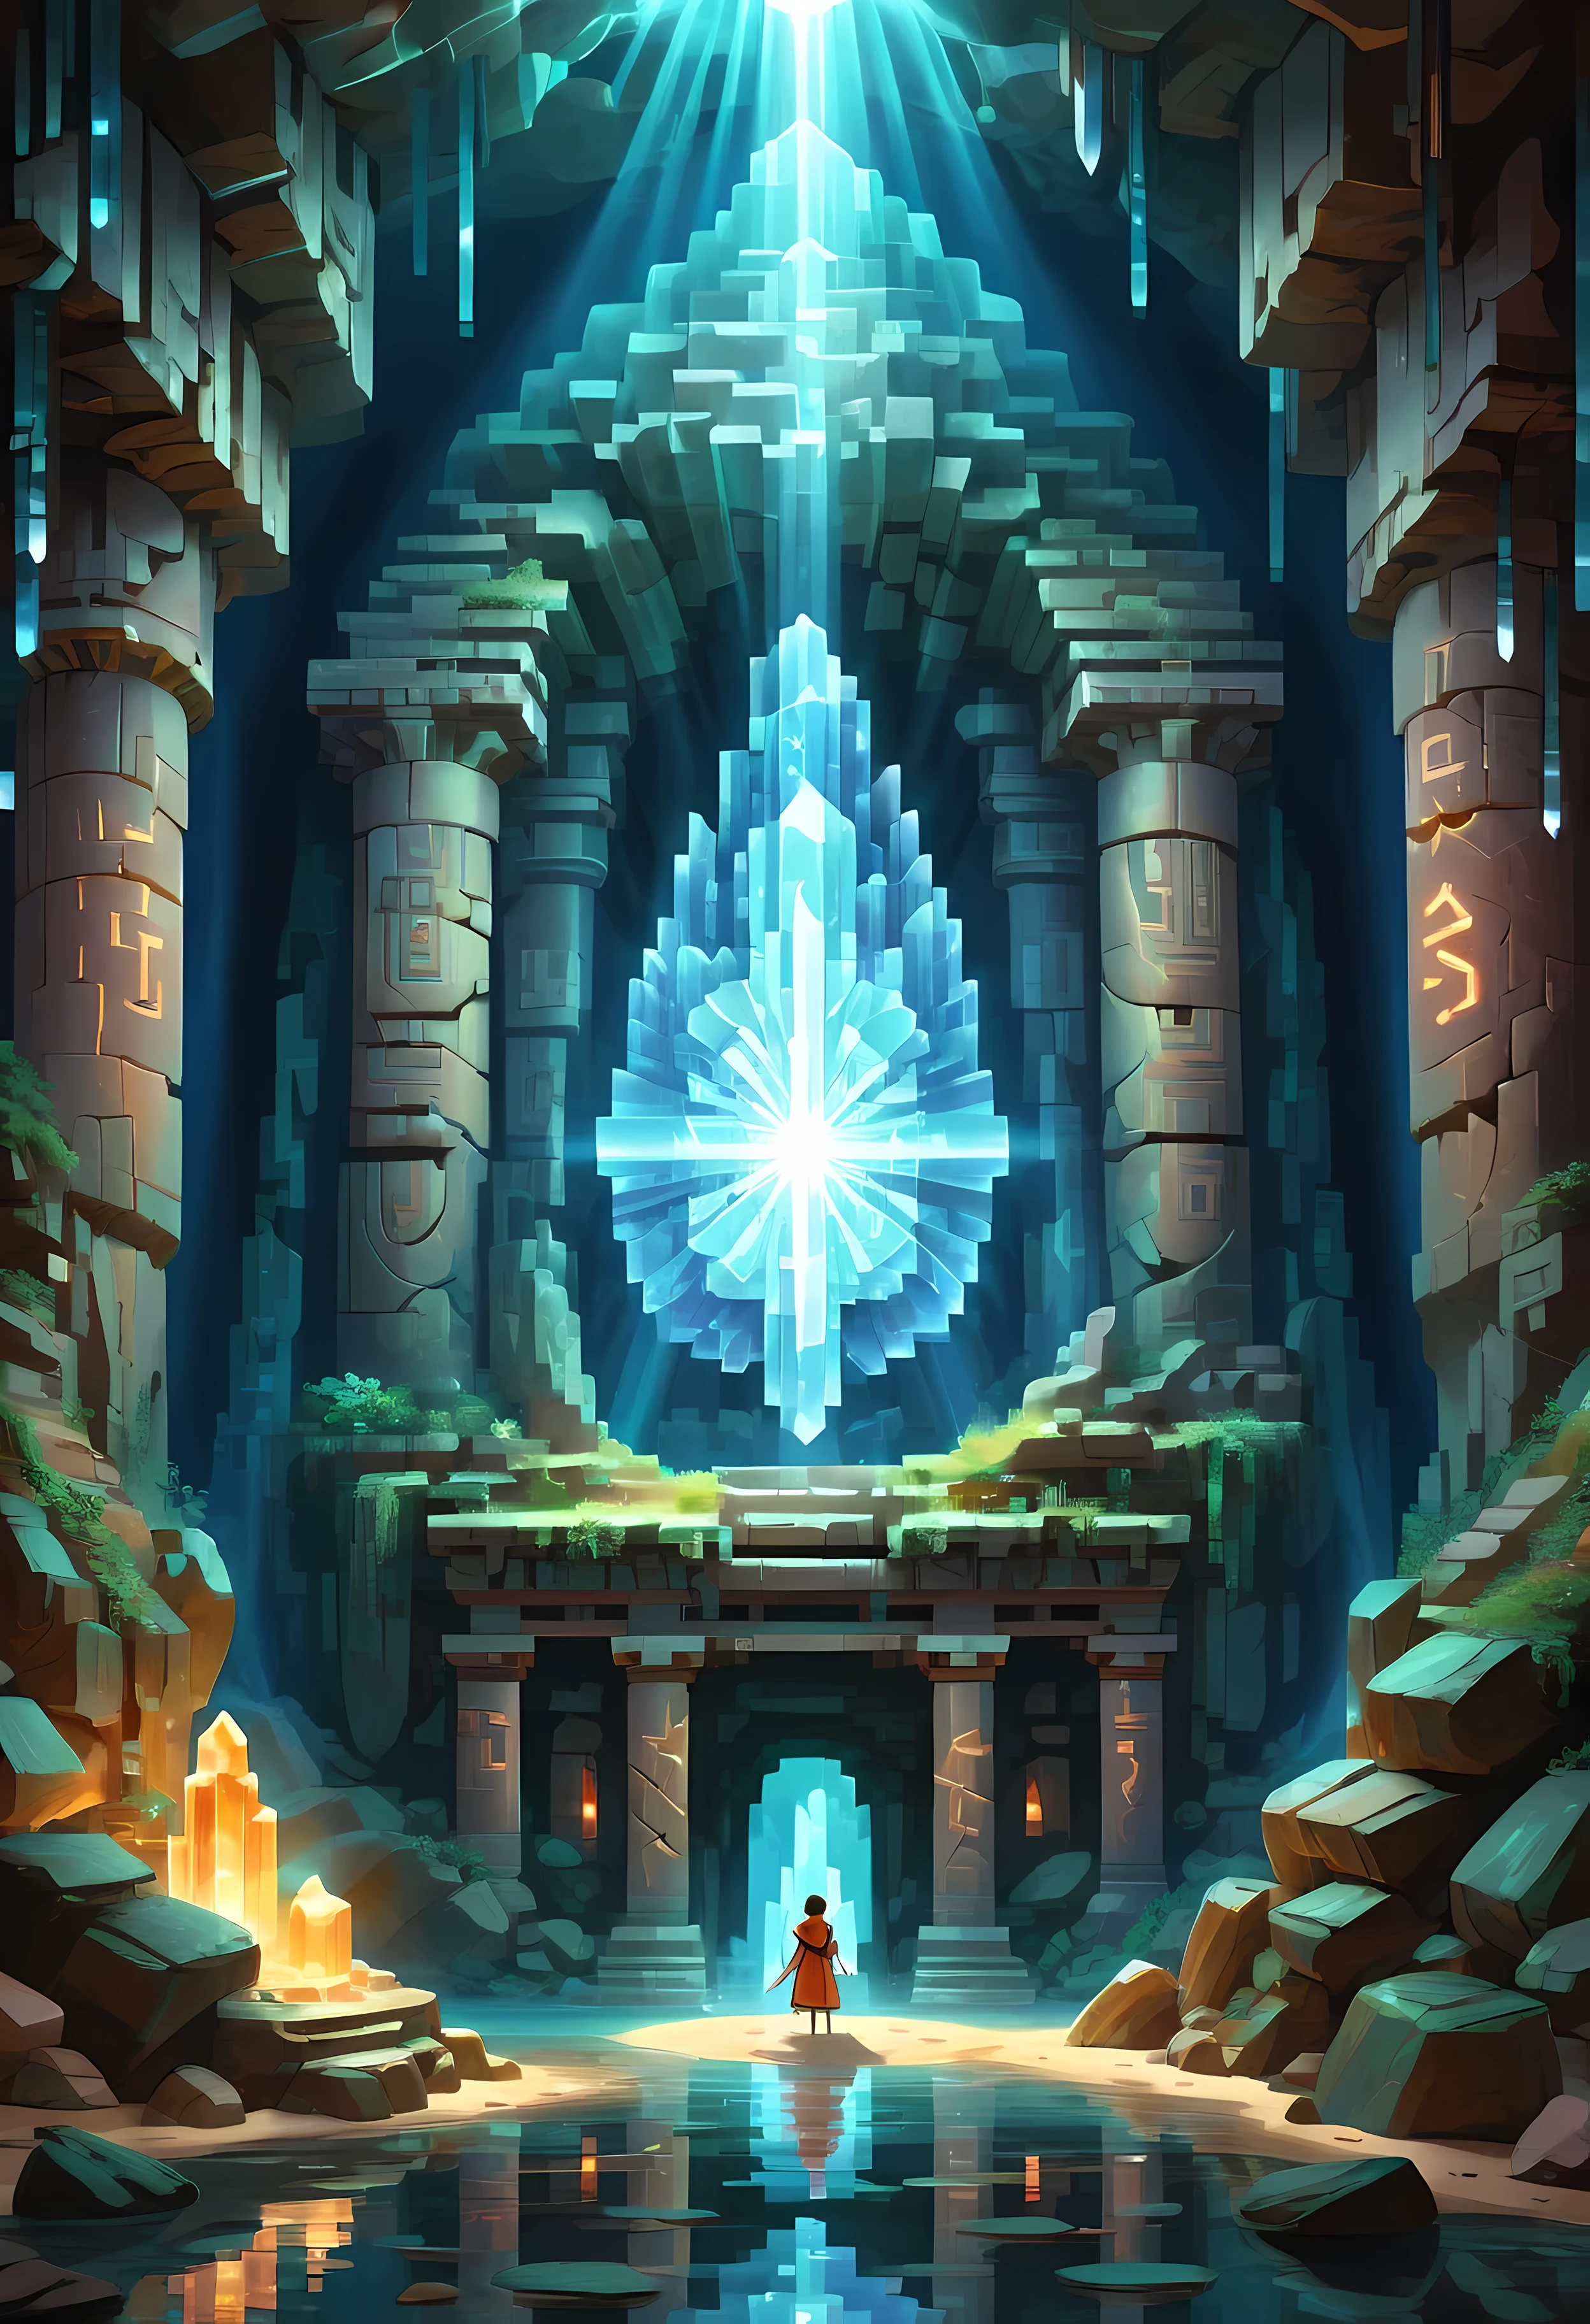 Pixel art, a monumental time portal crackling with energy and surrounded by swirling anomalies, ancient glyphs adorn its surface, ((iridescent light rays)), inside a mystical ((crystal)) cave, ((epic)), masterpiece in maximum 16K resolution, superb quality. | ((More_Detail))